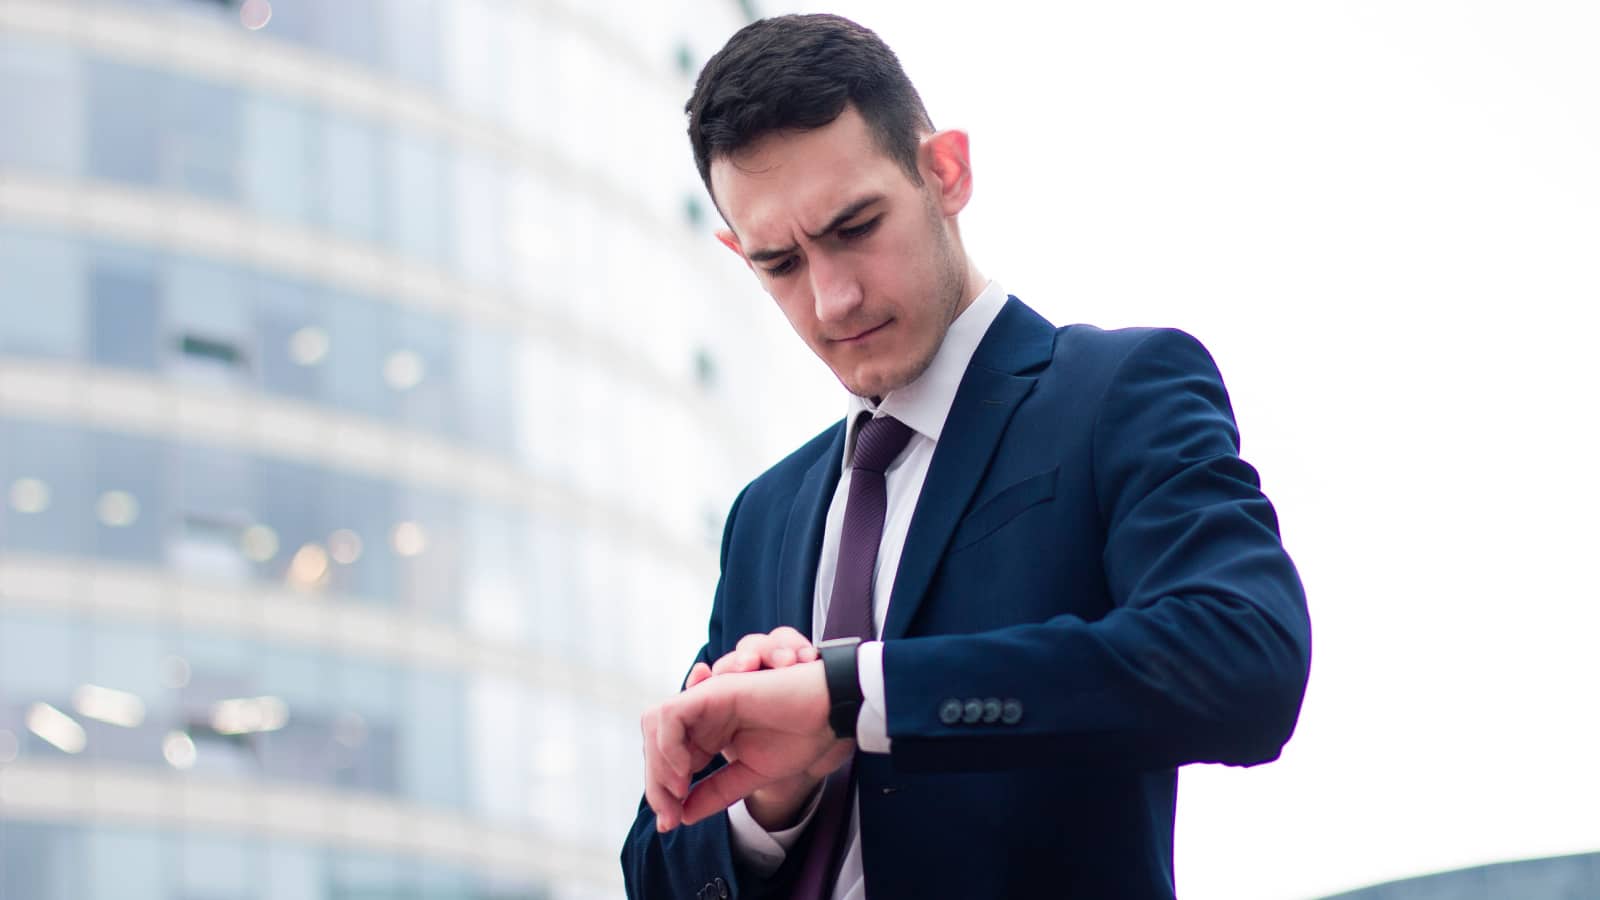 Serious concentrated alarmed young businessman looking at his wrist watch, formal dressed guy in suit is late for a meeting. Distressed male rushing to meet, watching time. Business busy life concept.